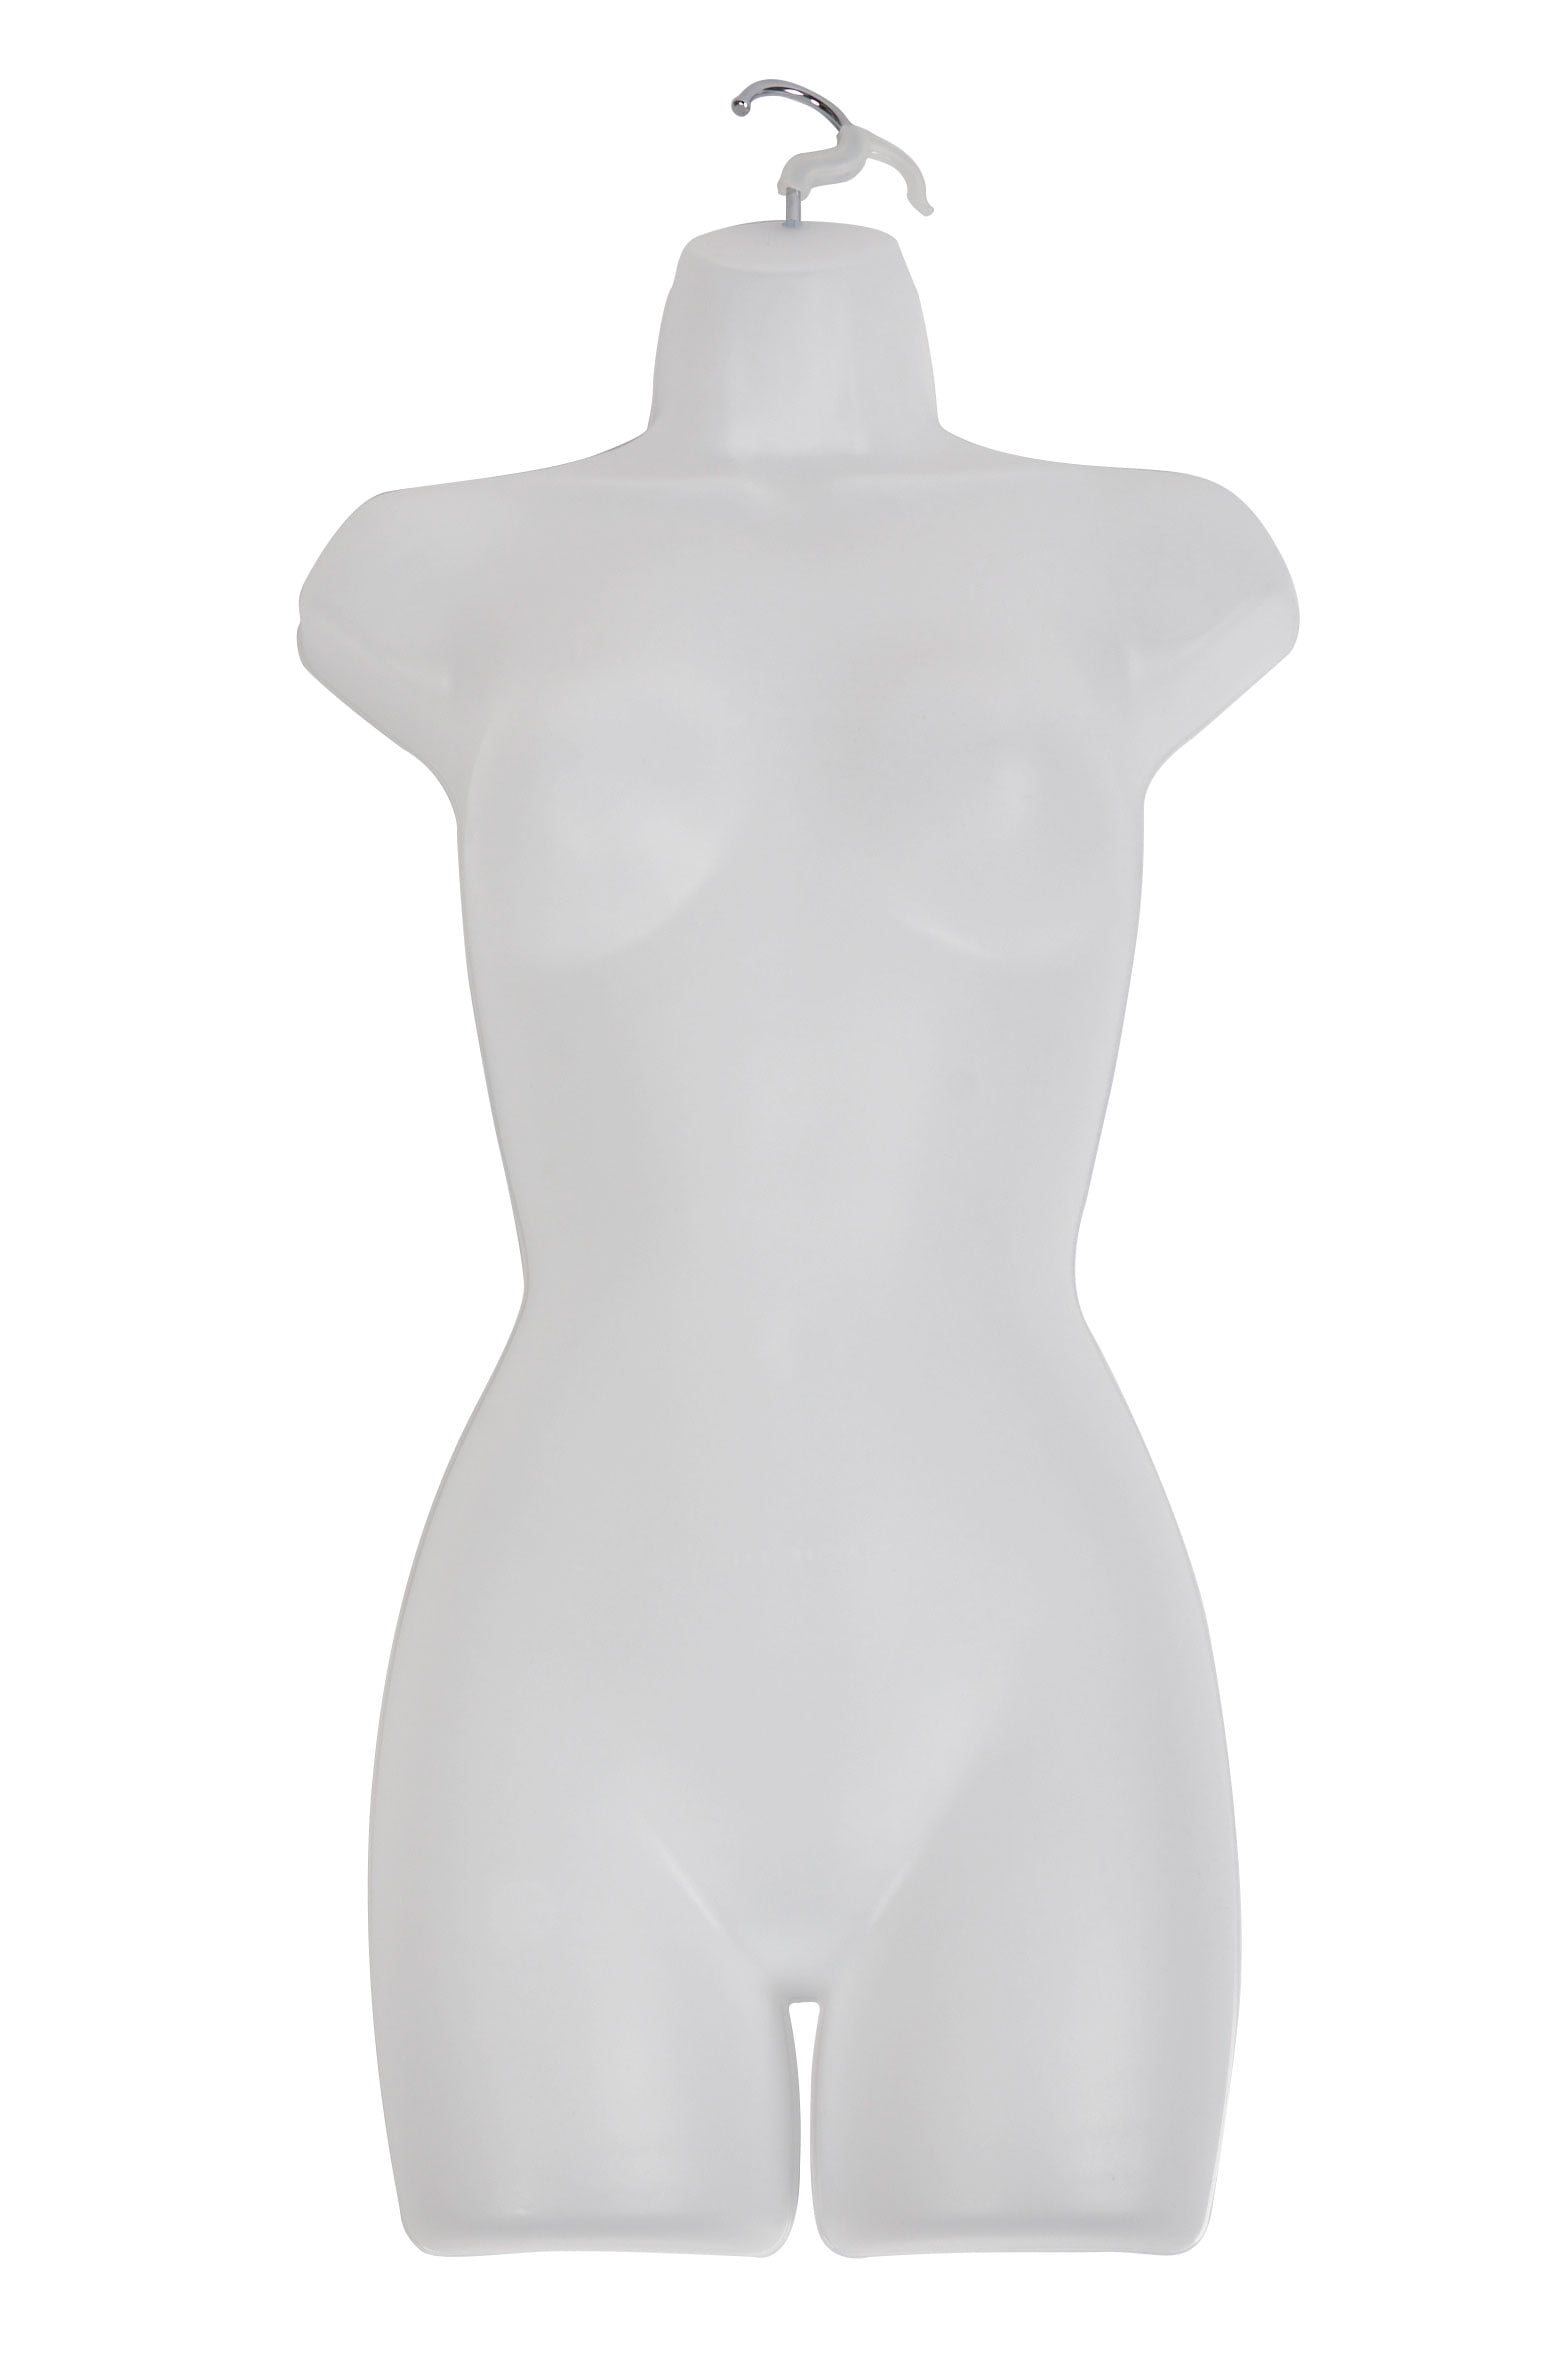 Male Molded Frosted Torso Form Fits Men's Sizes S-L 